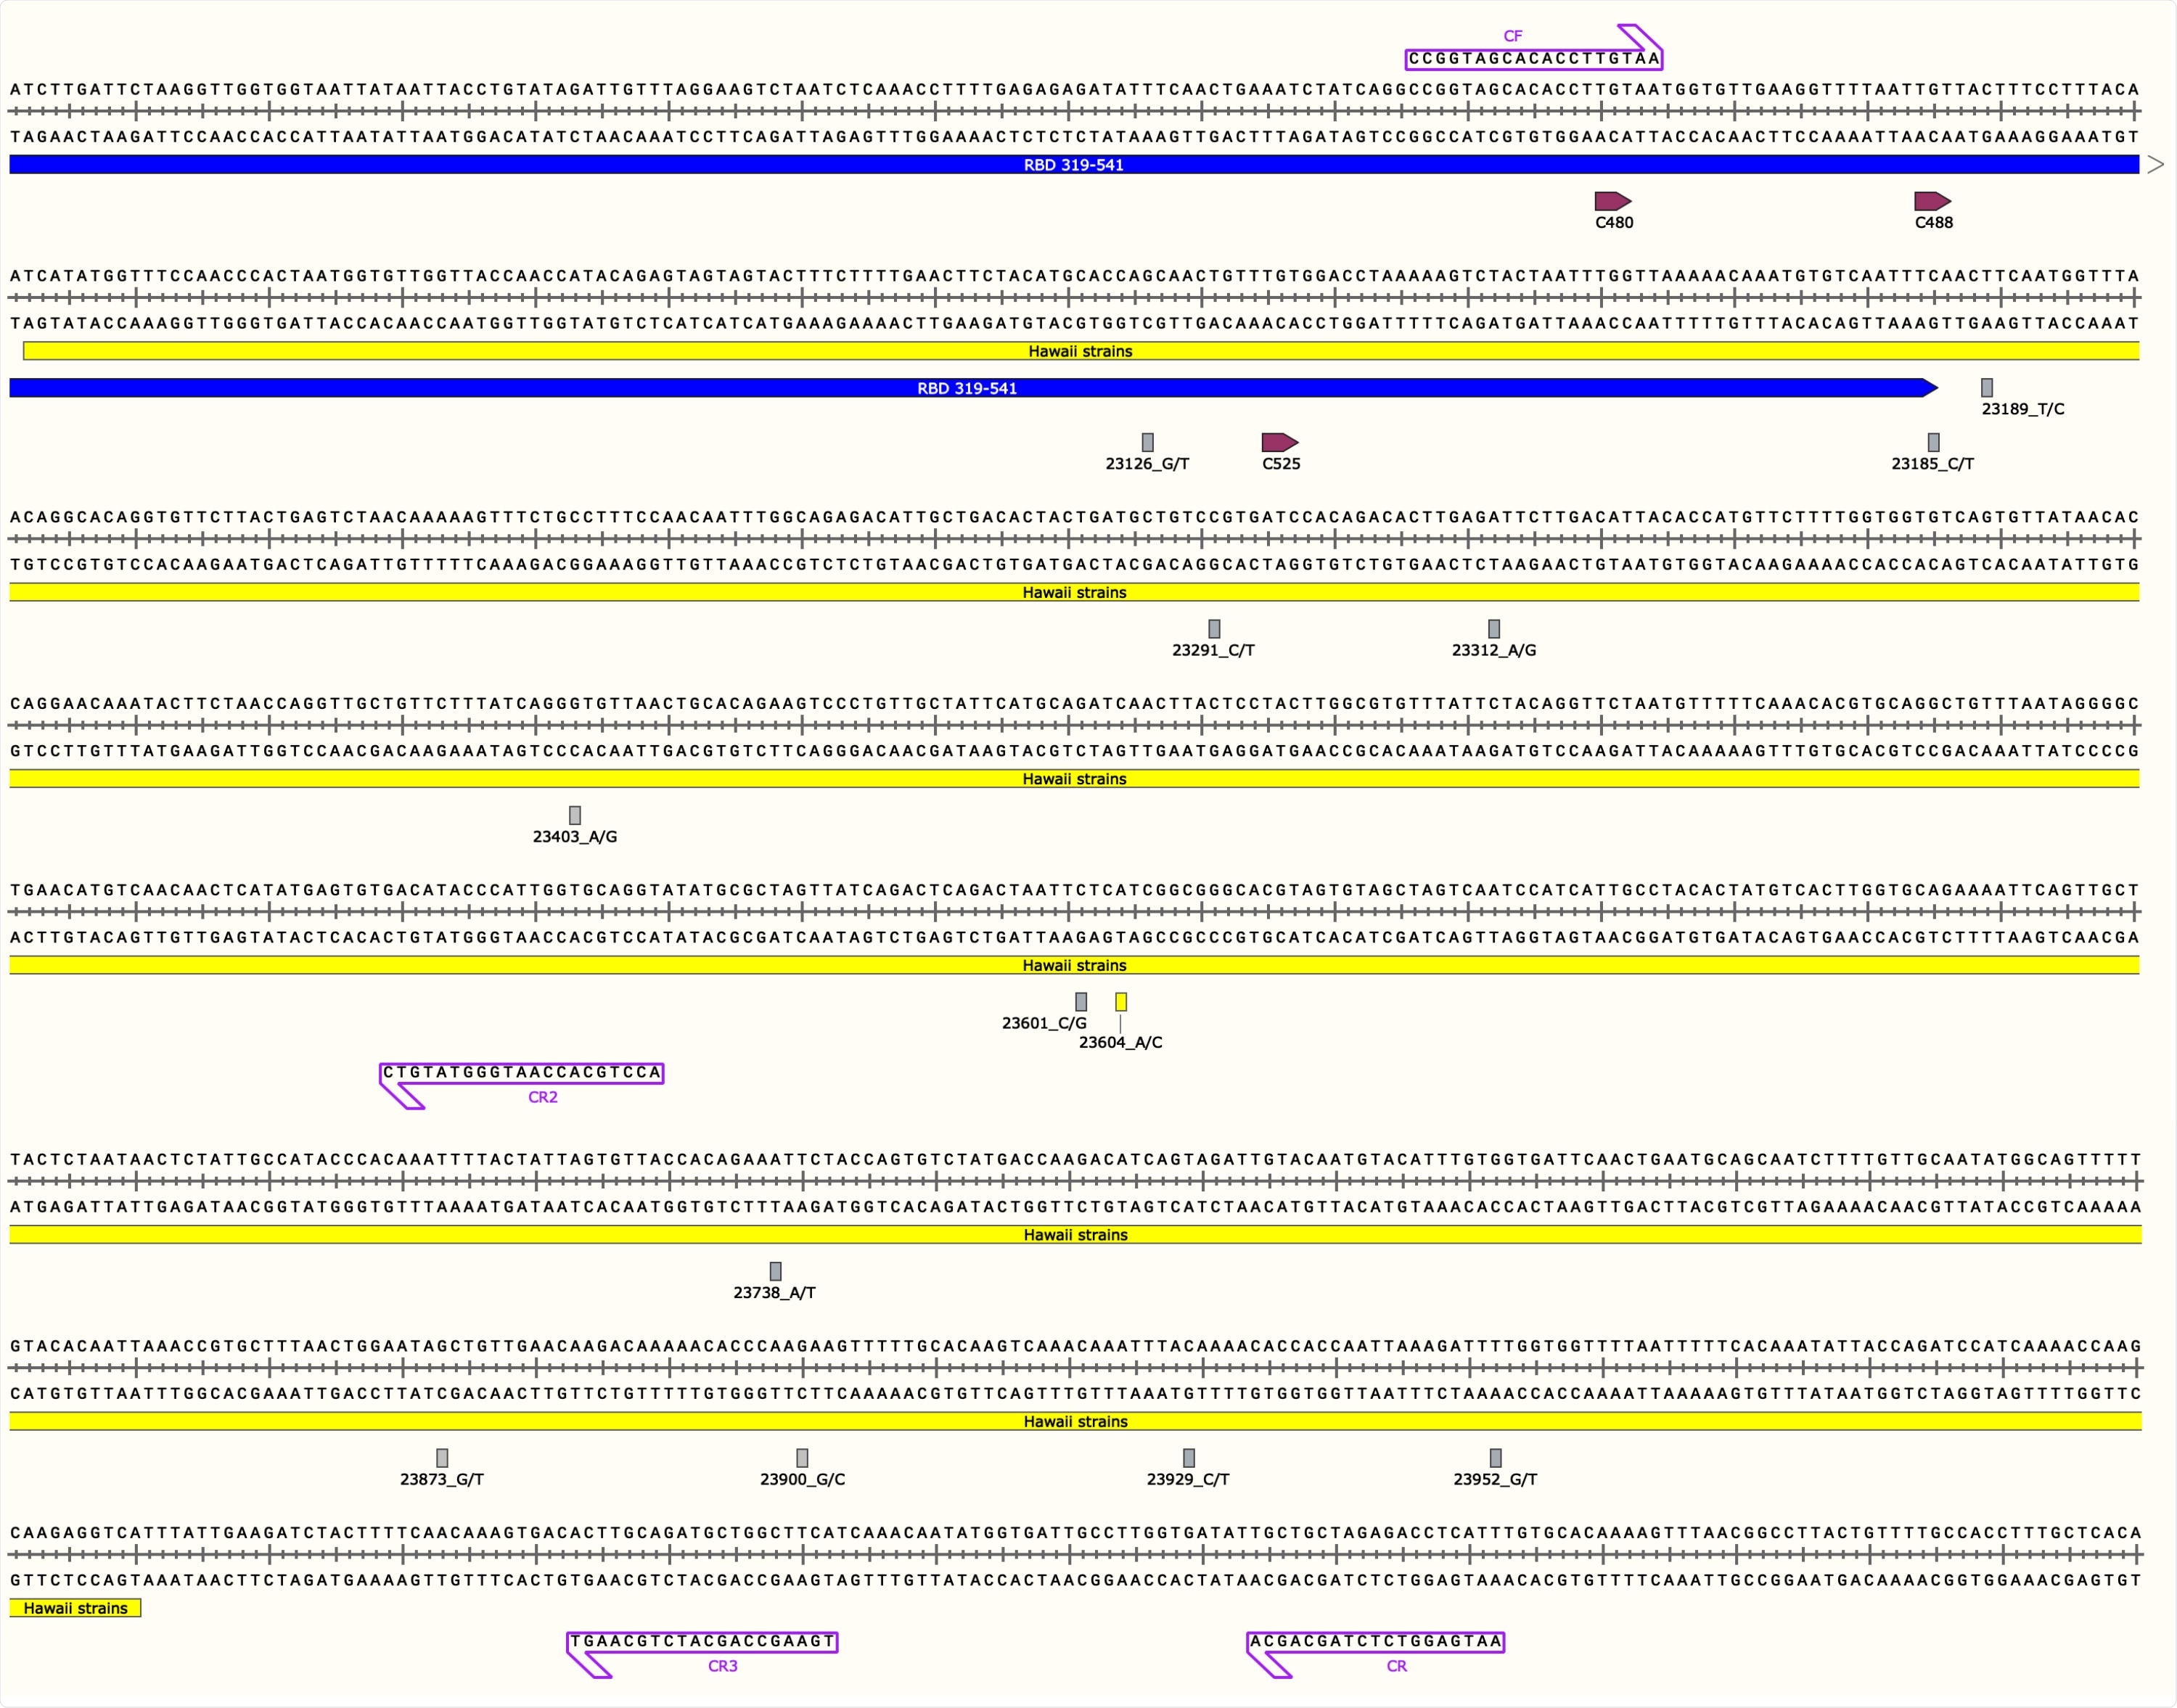 SARS-CoV-2 S Gene Region used in this Study Along with Annotated Primers, Mutations, and Cysteine Residues of the Receptor Binding Domain Figure represents the Hawaii strain MW237663 and MW237664 sequences. The primer pair, CF/CR, was used to amplify the 1,127-bp S gene fragment and primers CF, CR, CR2 and CR3 depicted with purple boxes were used for Sanger sequencing. The yellow box indicates the start and end of the 969-bp sequence. The blue line indicates the 3’ end of the S gene receptor binding domain (RBD). RBD cysteine residues are shown in depicted boxes. All mutations found in this study are in their respective loci with nucleotide numbers and rectangular boxes correlating to the sense strand as indicated after the nucleotide number and underscore in the figure (nucleotide/protein mutations: G23126T/A522S, C23185T/F541F, T23189C/F543L, C23291T/R577C, A23312G/I584V, A23403G/D614G, C23601G/S680C, C23604A/P681H, A23738T/I726F, G23873T/A771S, G23900C/E780Q, C23929T/Y790Y, and T23952G/F797C). All boxes are grey except for the P681H mutation seen in the Hawaii strains from this study, shown with a yellow rectangle. Image was generated with the SnapGene software (from Insightful Science; available at snapgene.com) and was created with BioRender.com.